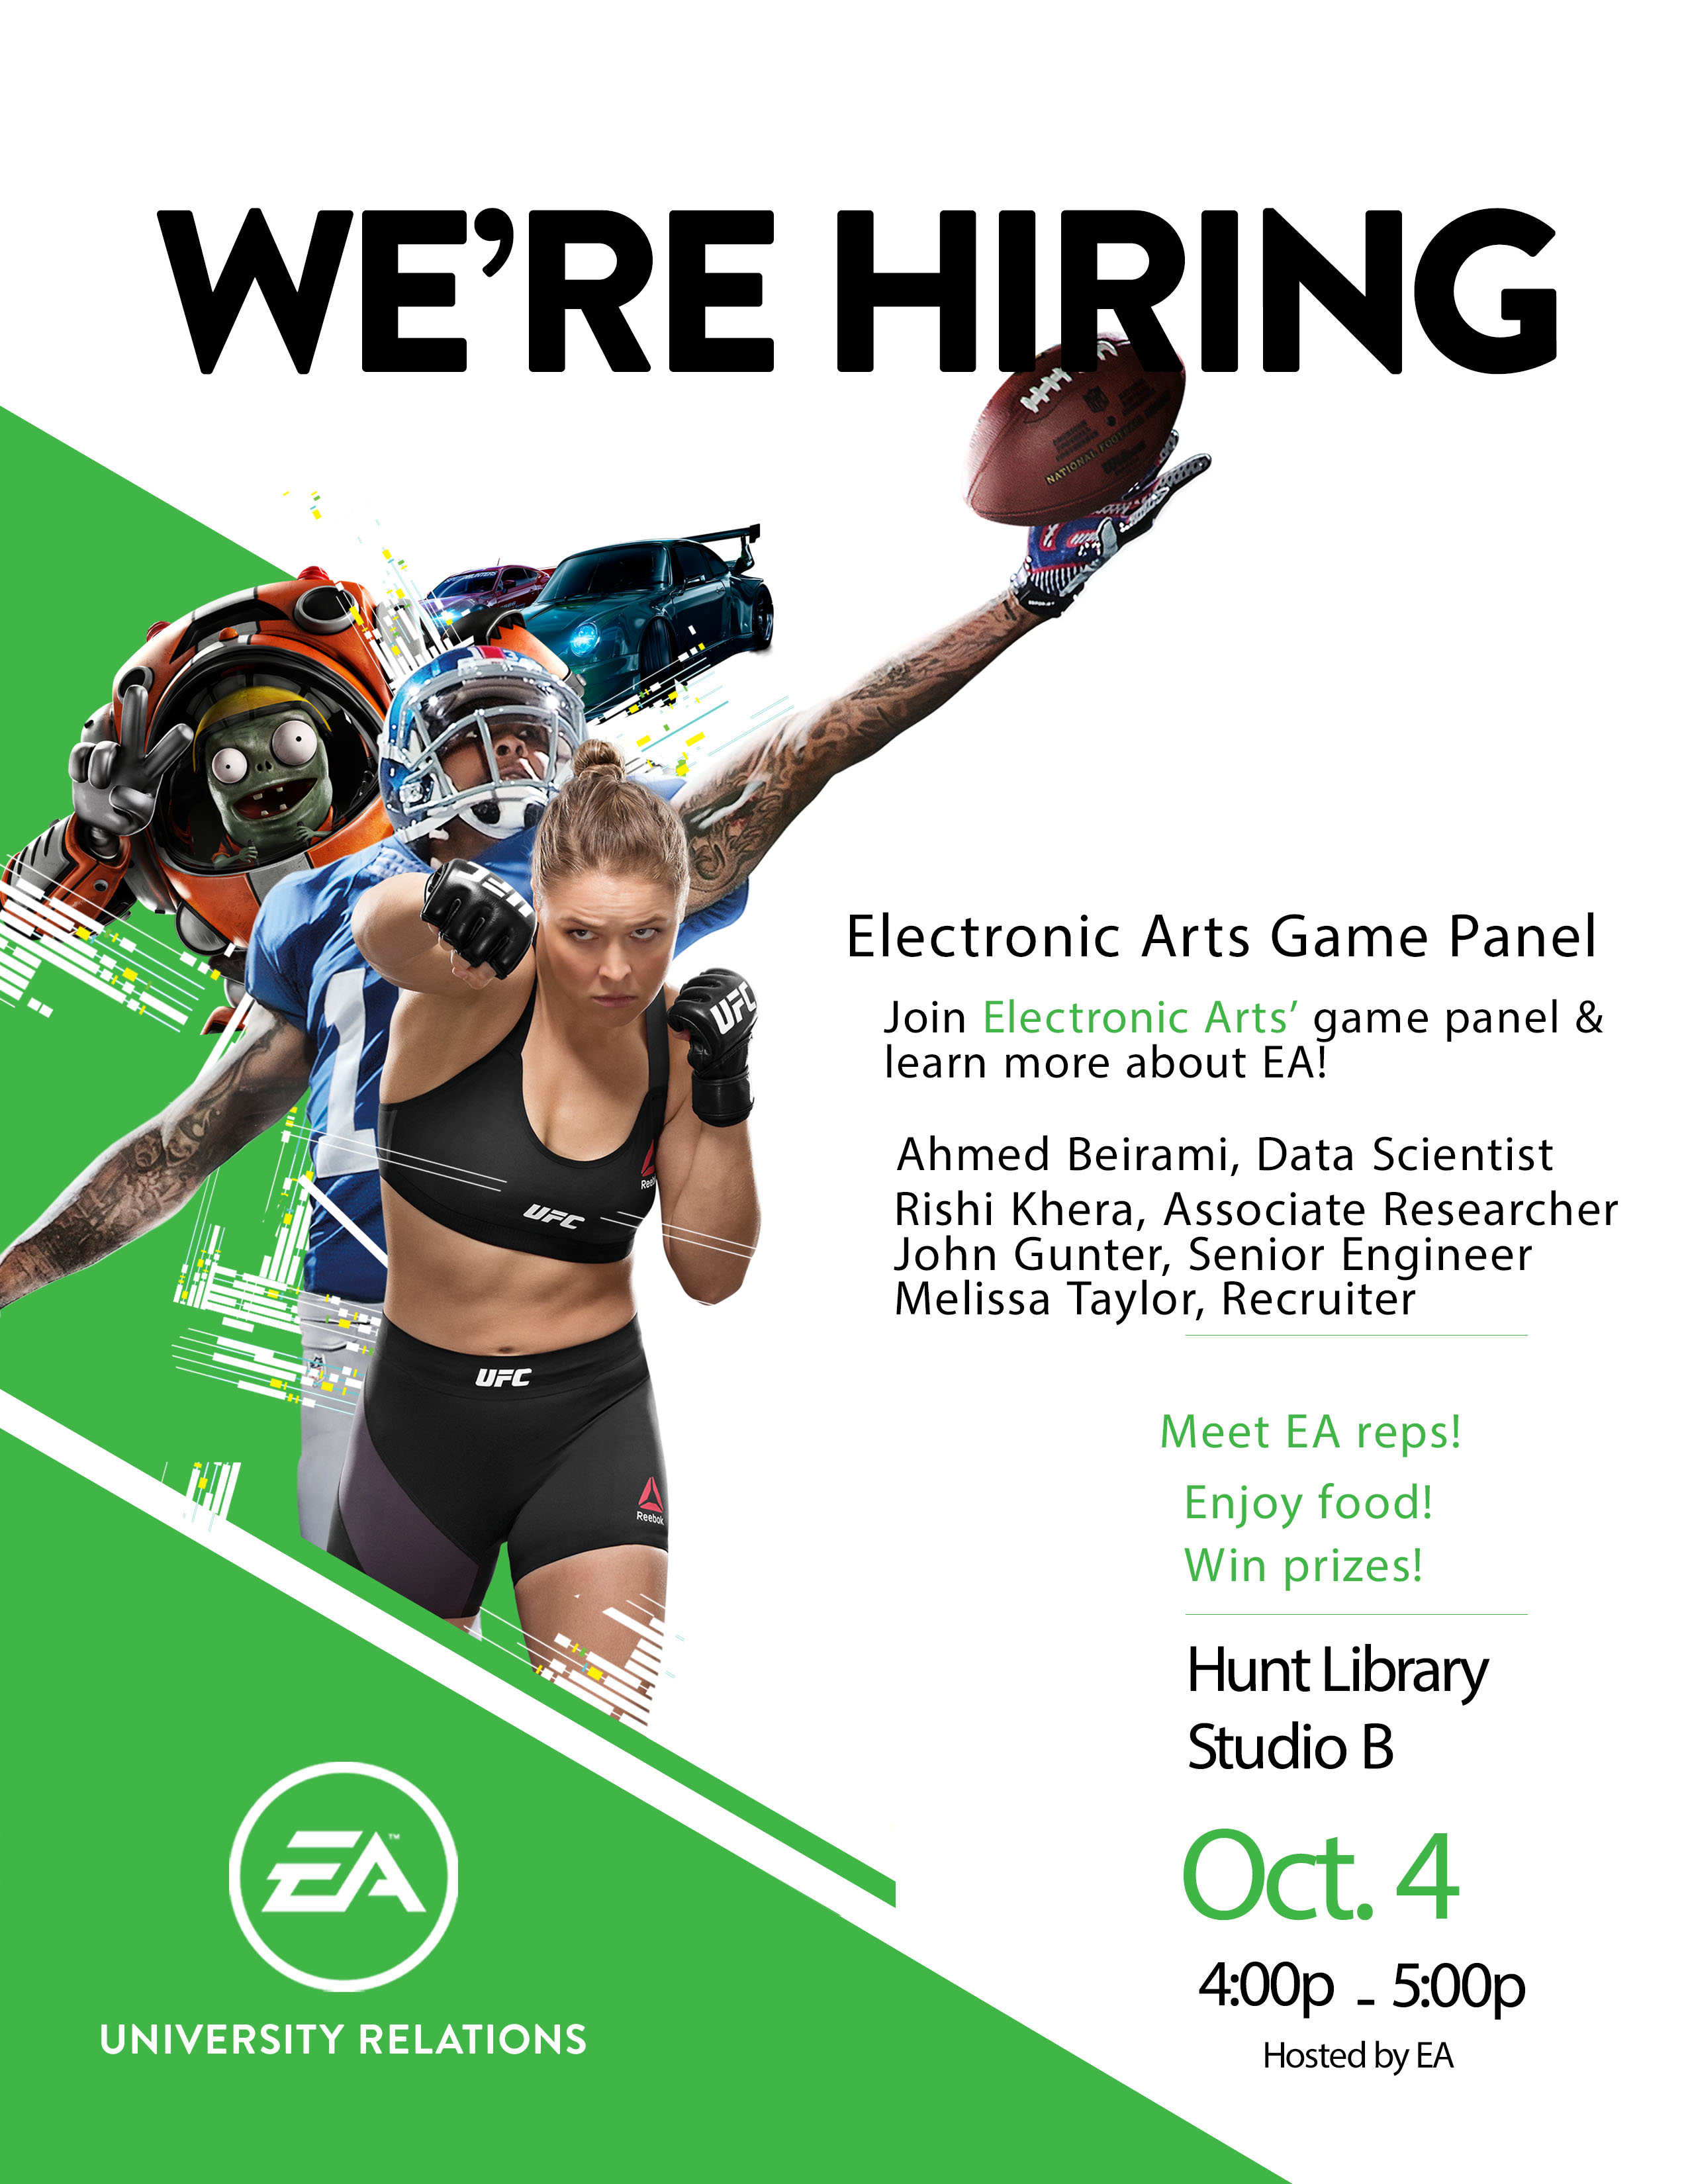 Flyer for Electronic Arts Panel depicting athletes and information on attendees